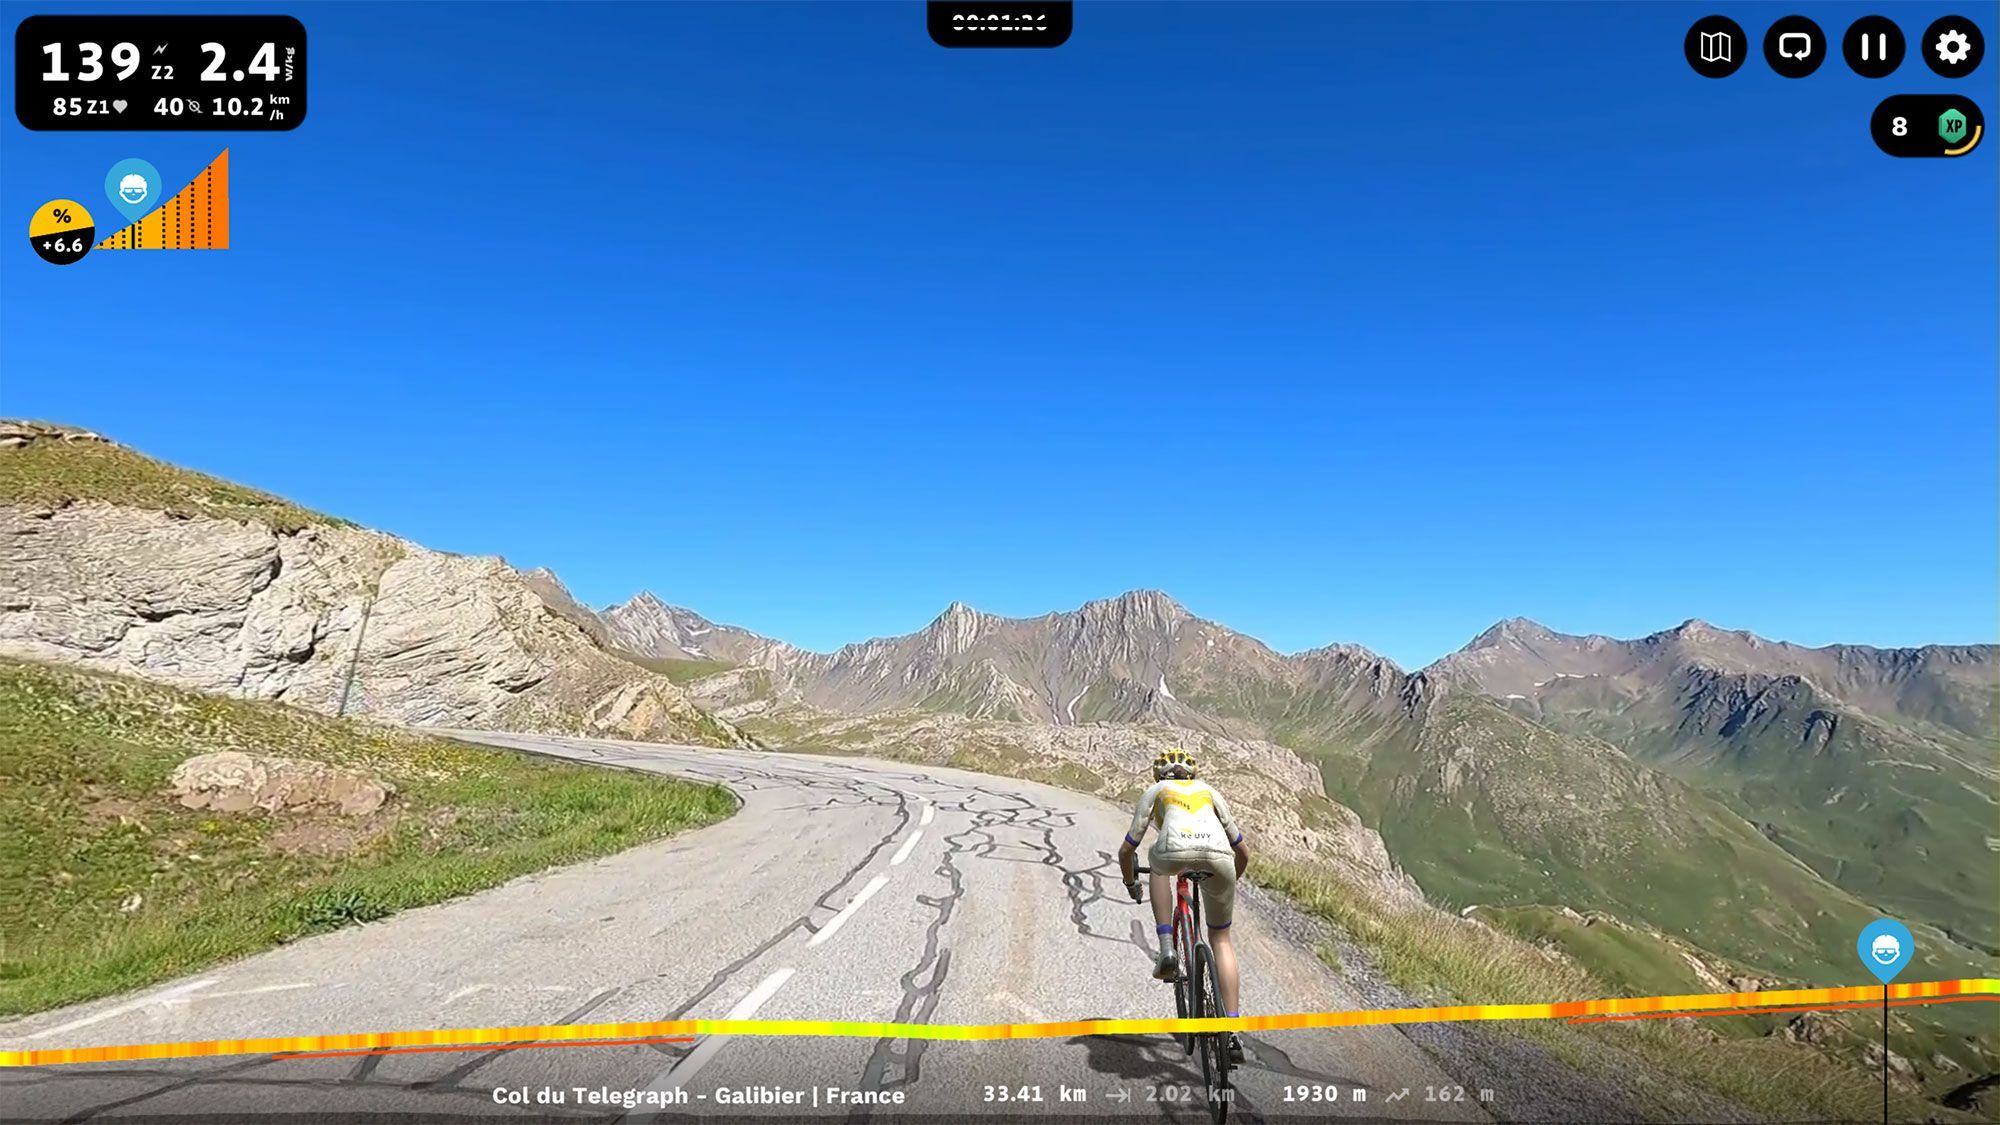 Col du Telegraph - Galibier in France on ROUVY